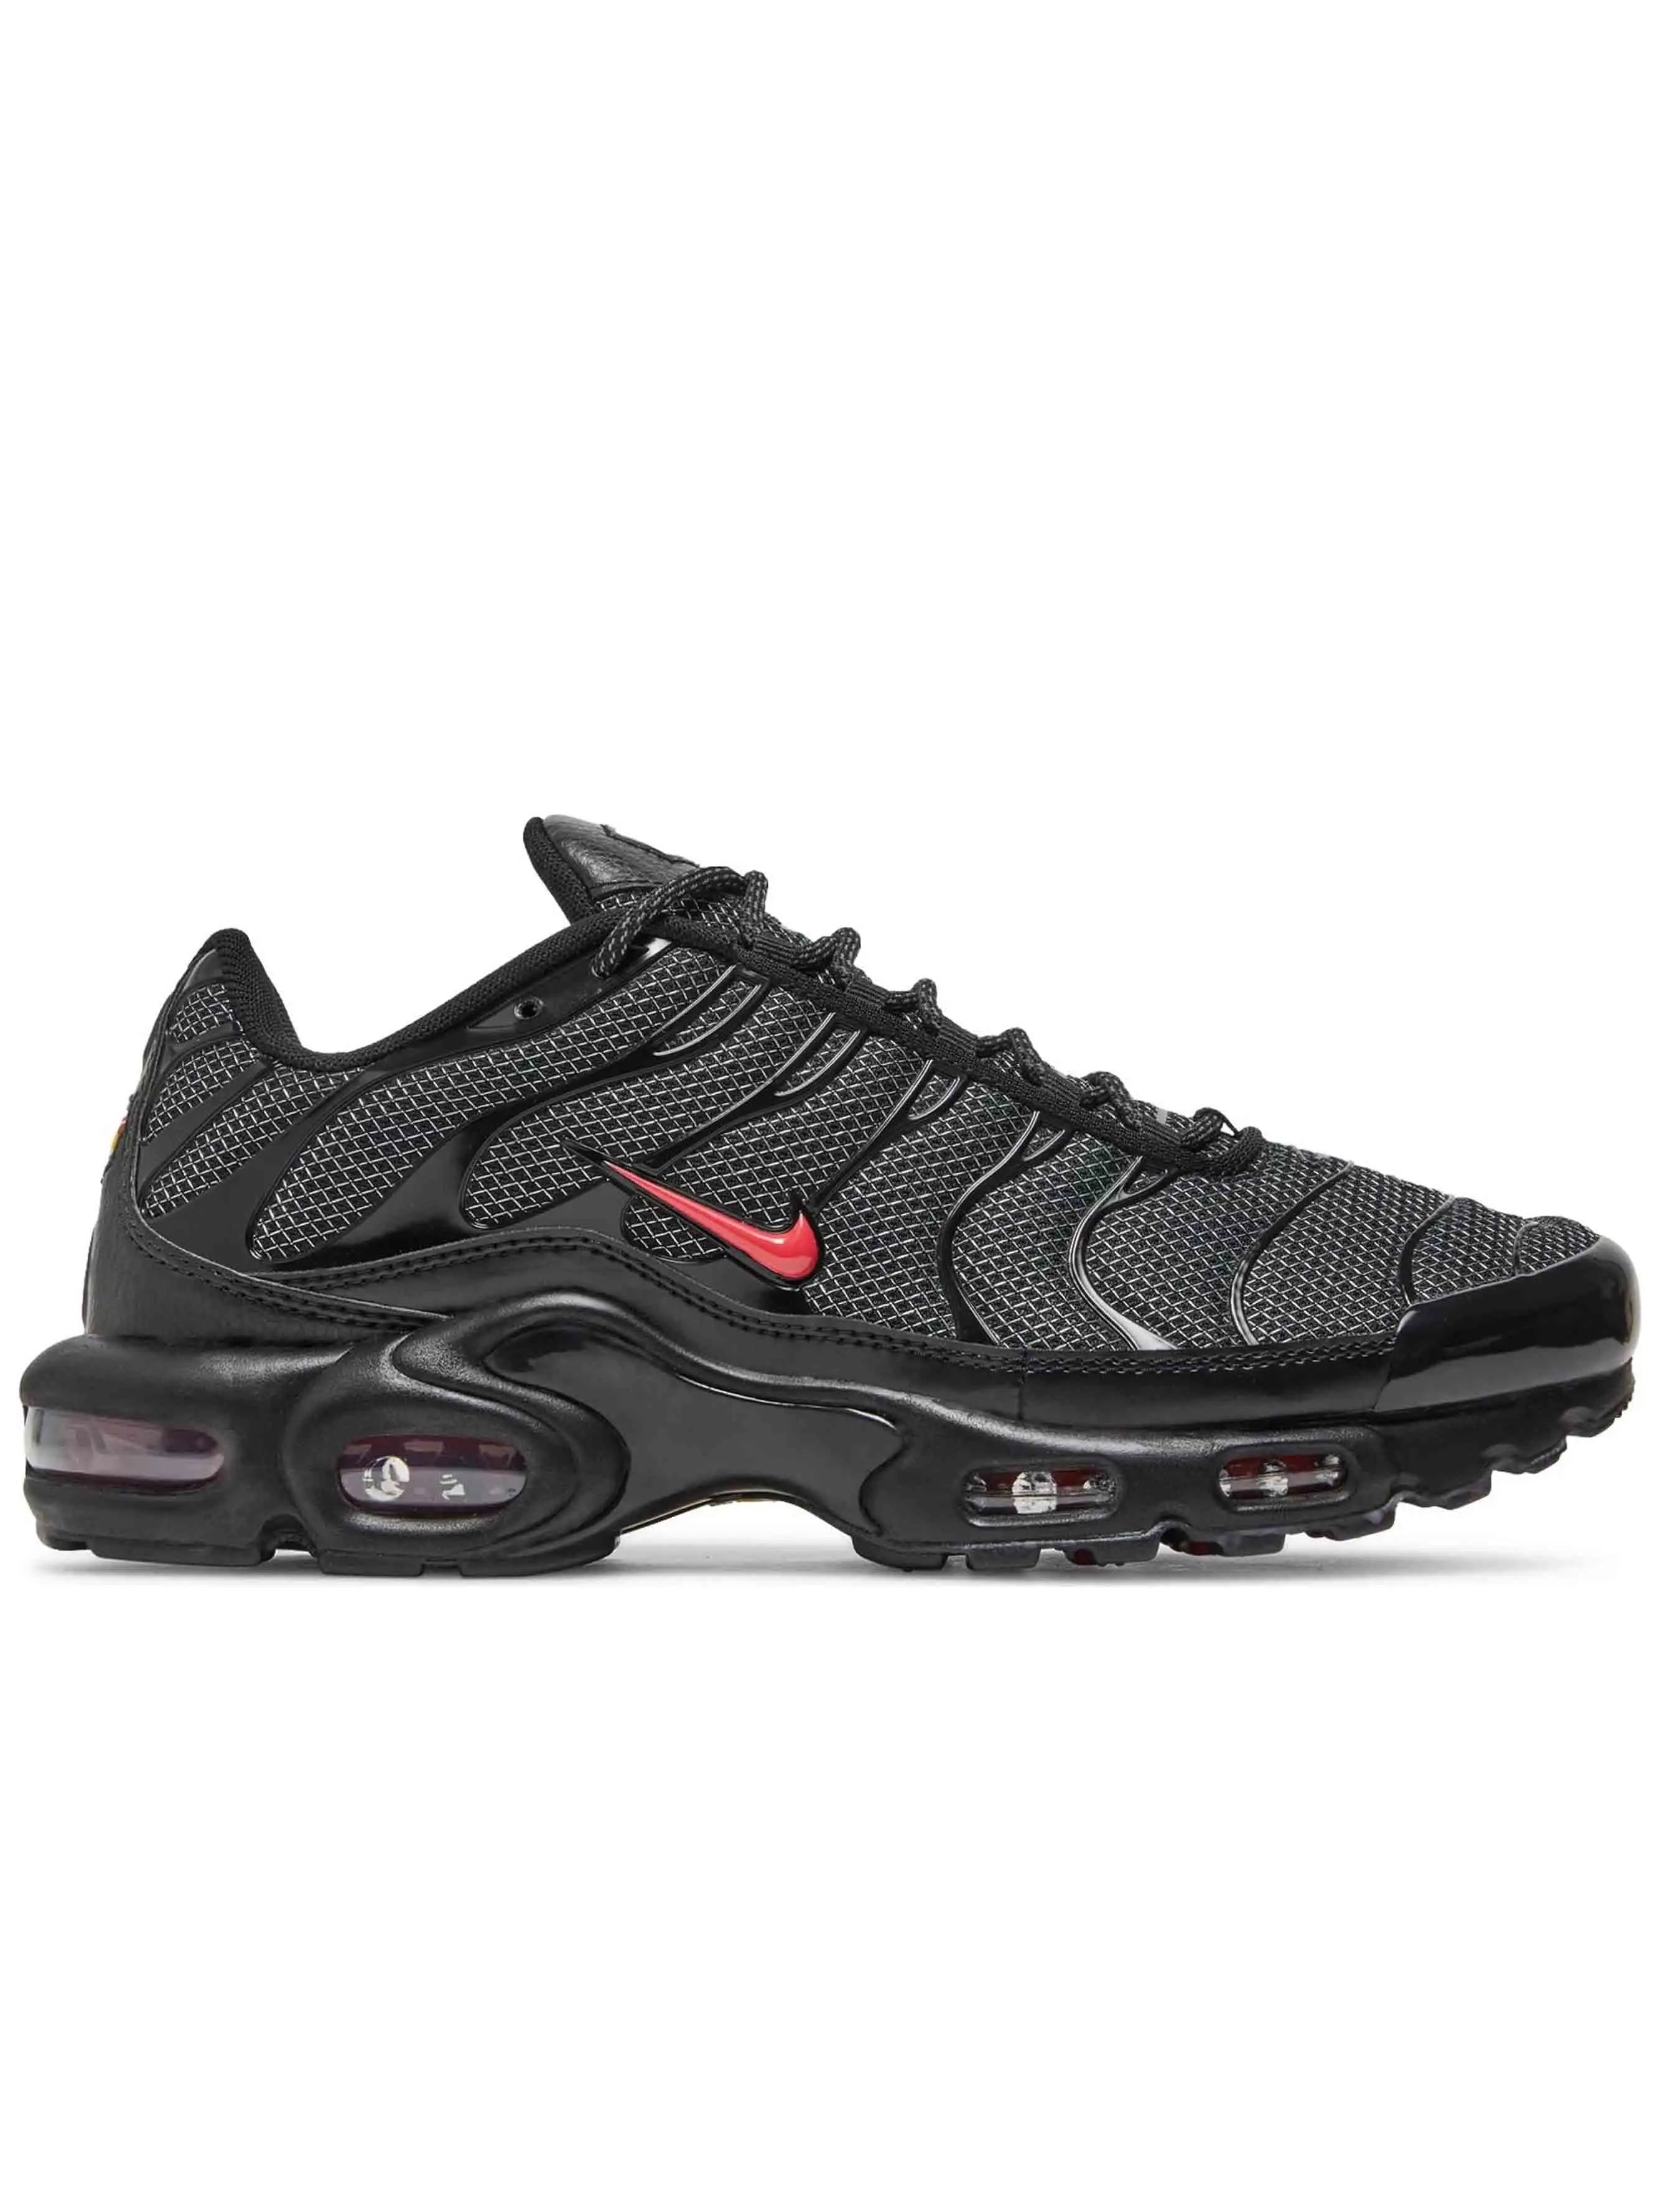 Nike Air Max Plus TN Metal Mesh Black Red in Auckland, New Zealand ...